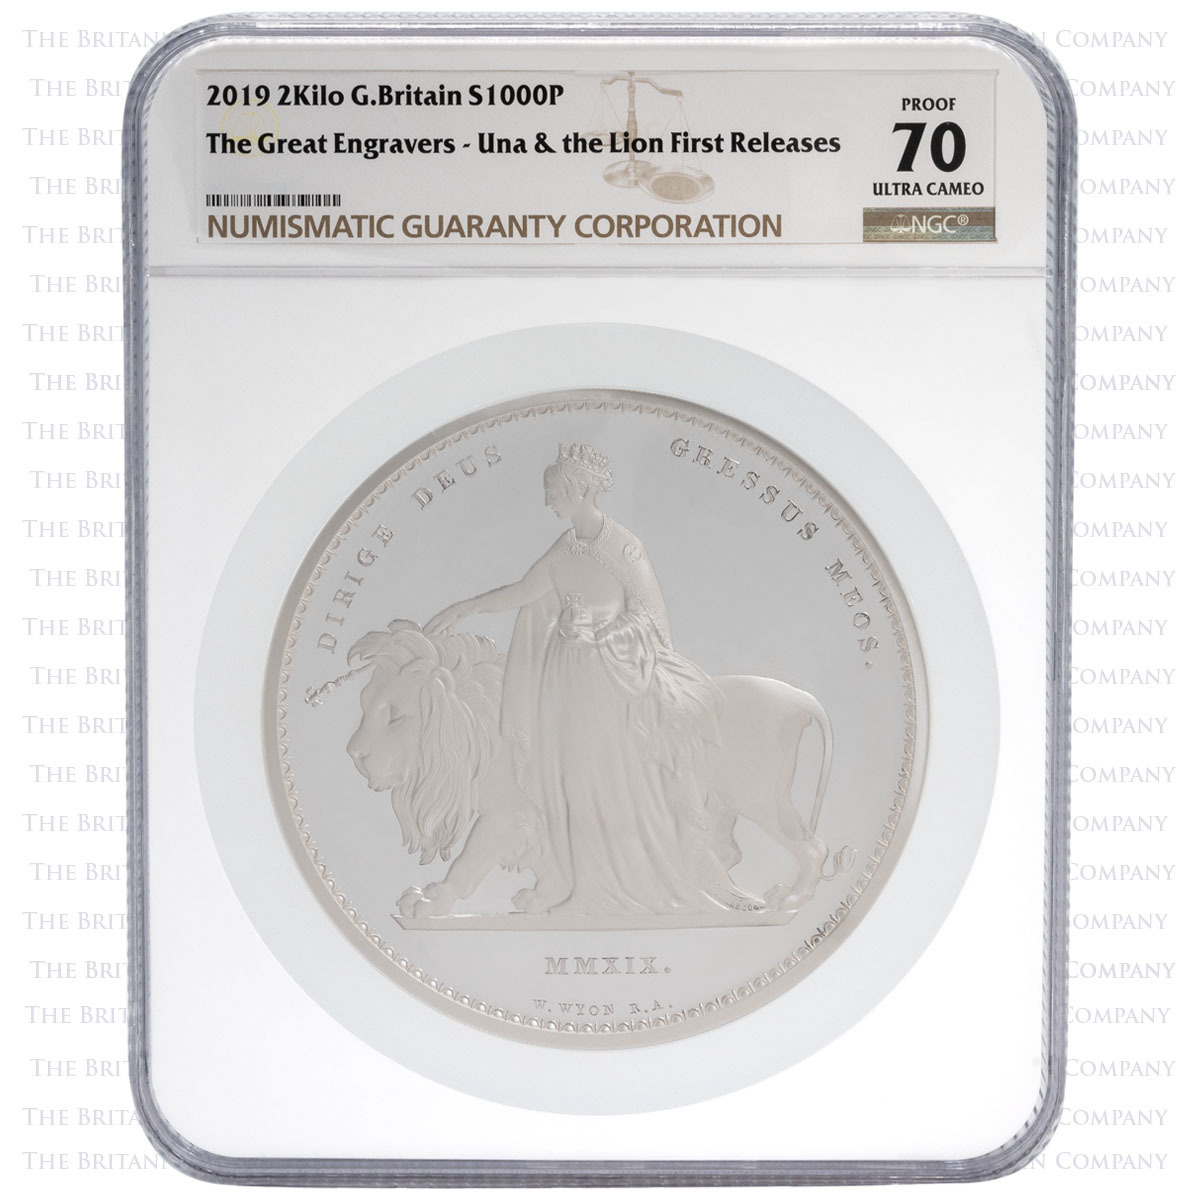 UK19UL2KS 2019 Great Engravers Una And The Lion Two Kilogram Silver Proof Coin NGC Graded PF 70 Ultra Cameo Reverse